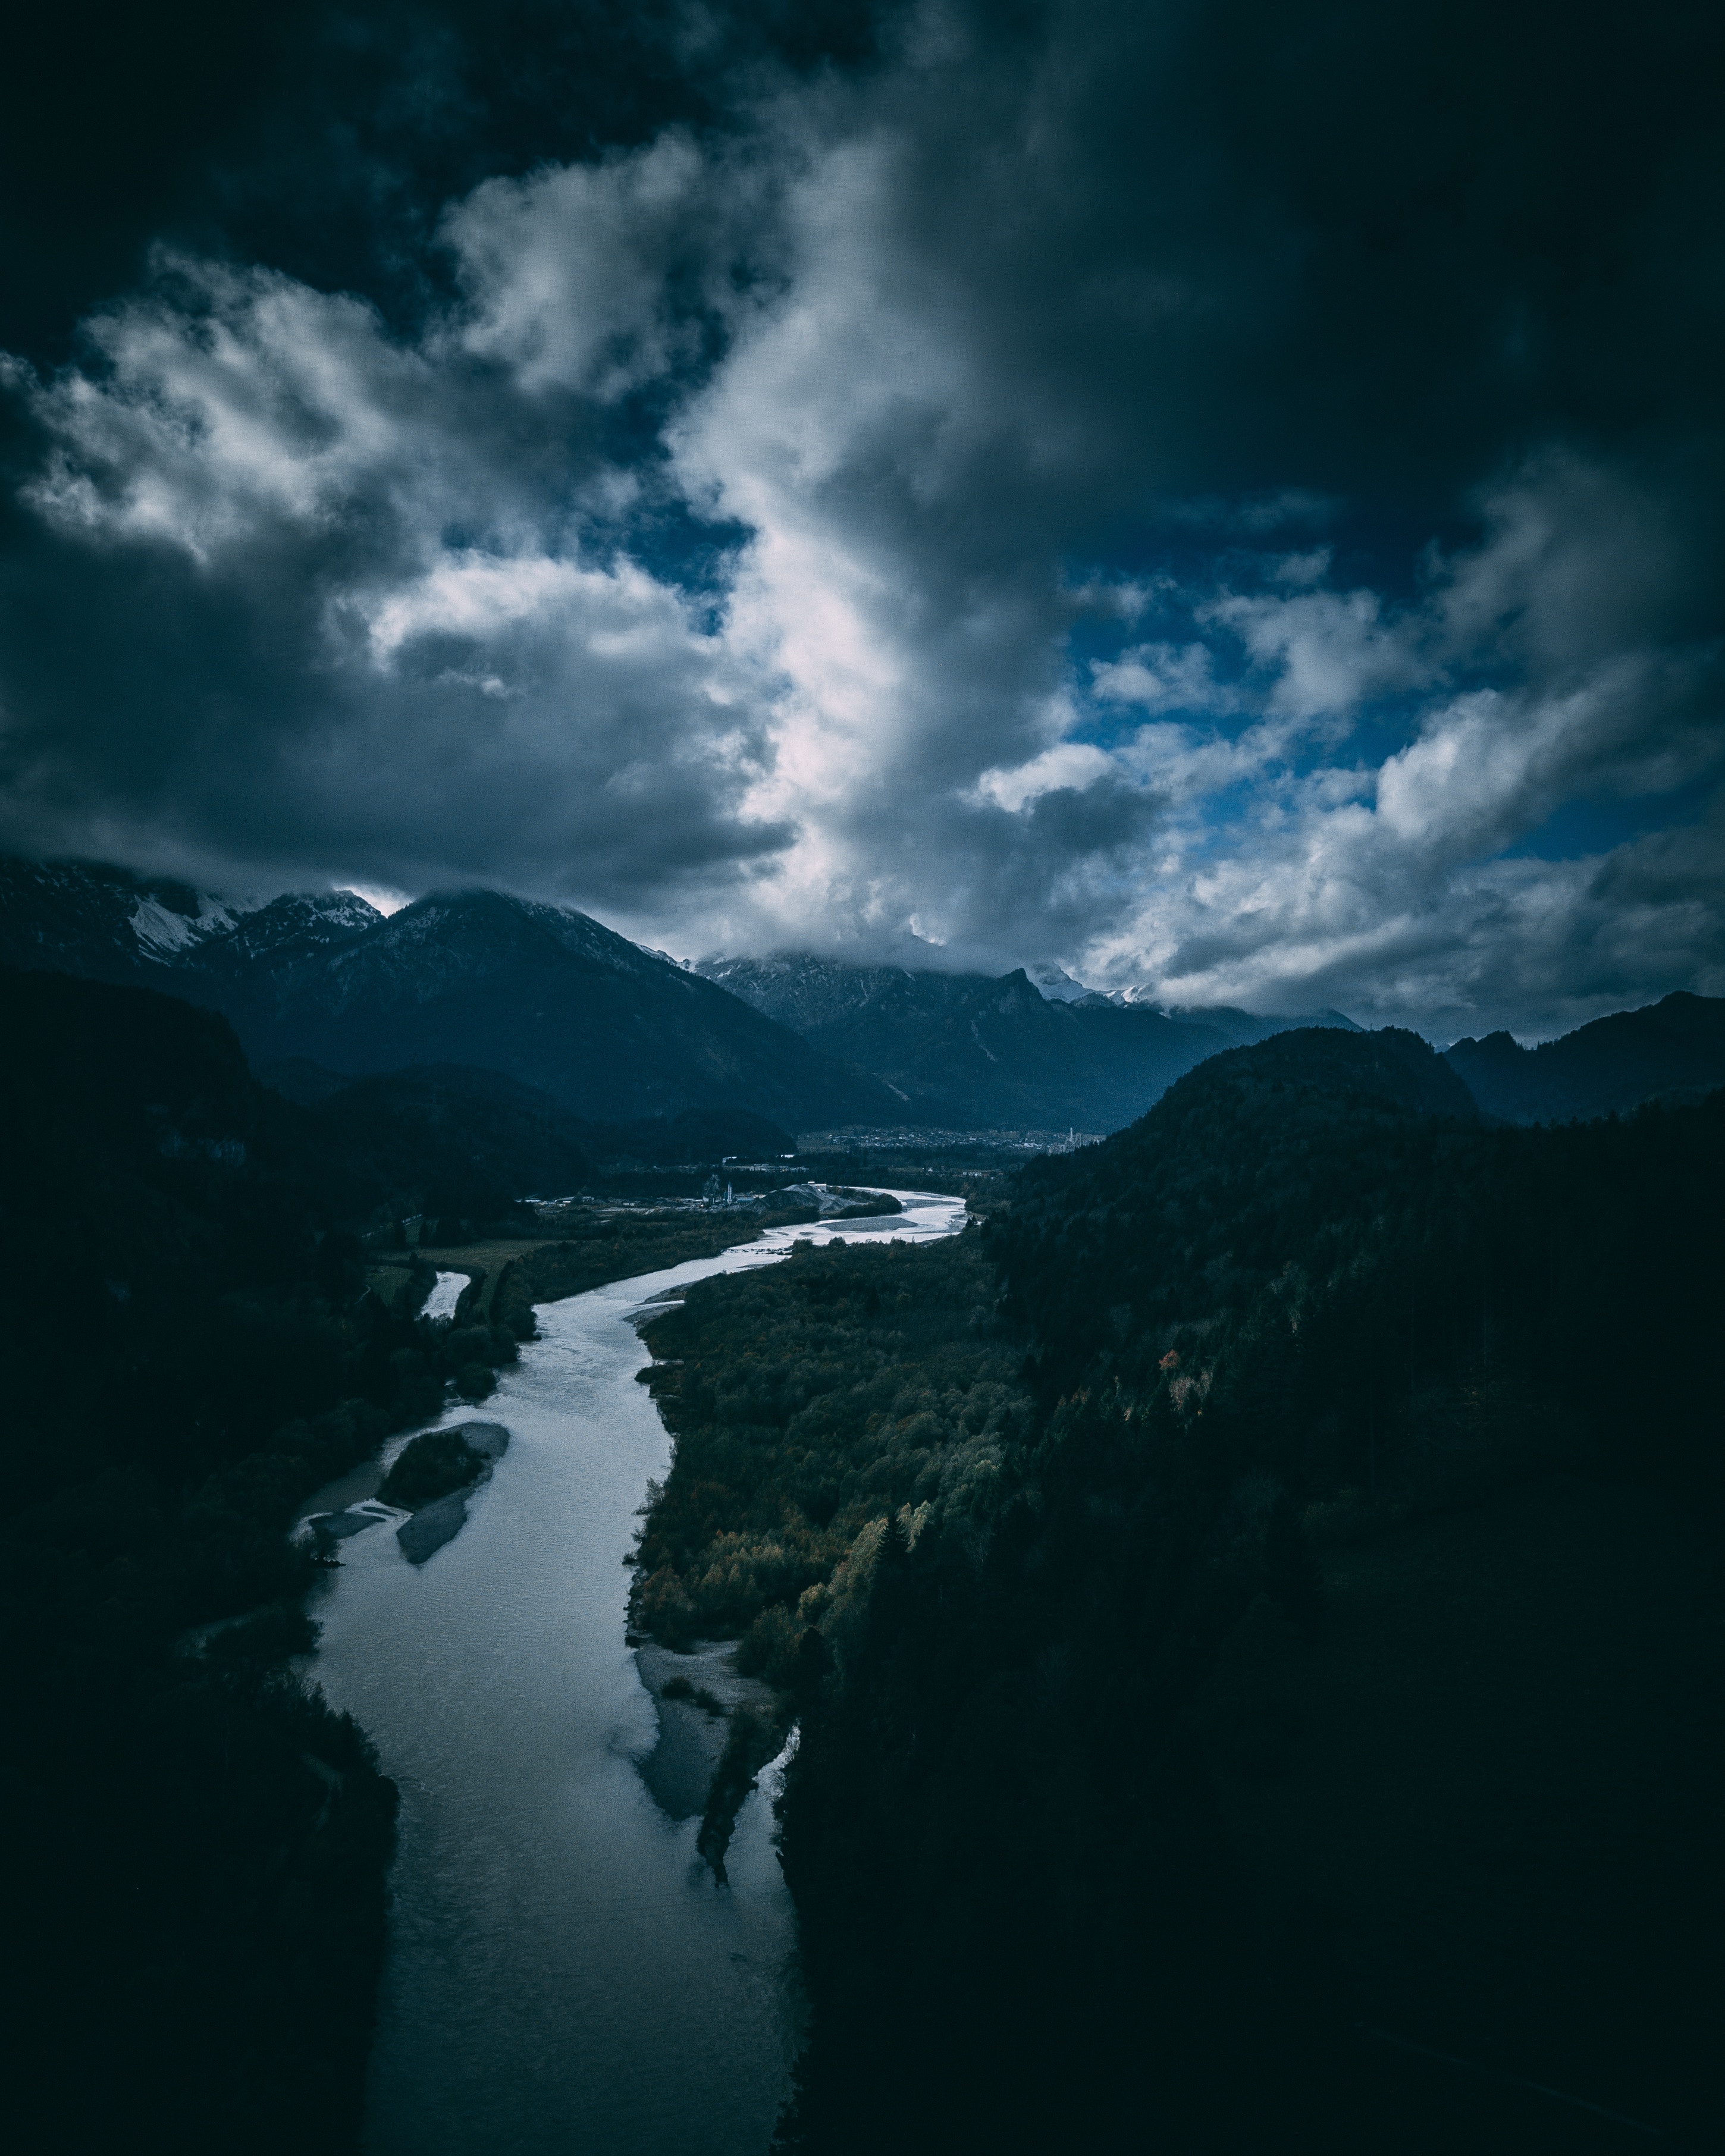 germany, trees, clouds, sky, nature, rivers, mountains, view from above Full HD